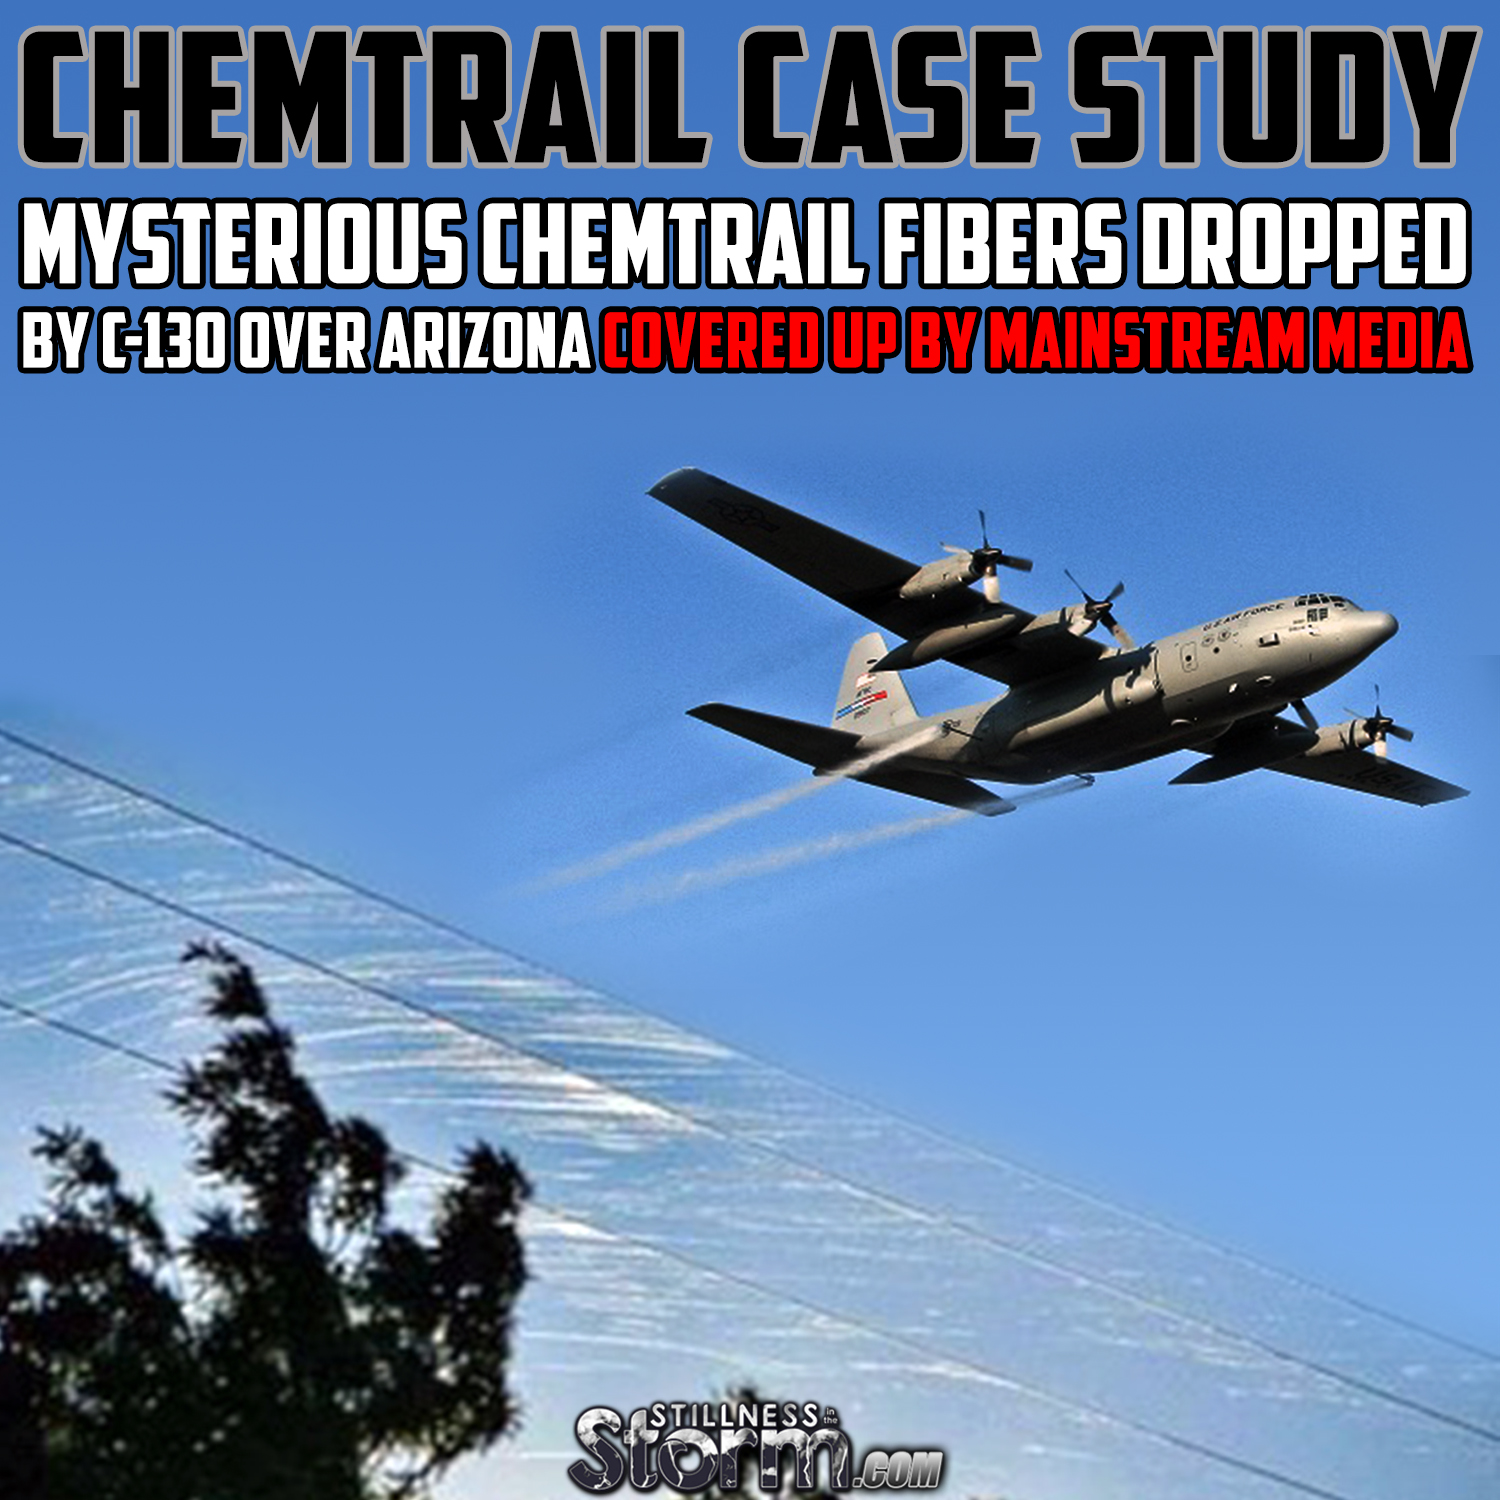 Chemtrail%2BCase%2BStudy%2BMysterious%2BChemtrail%2BFibers%2BDropped.jpg